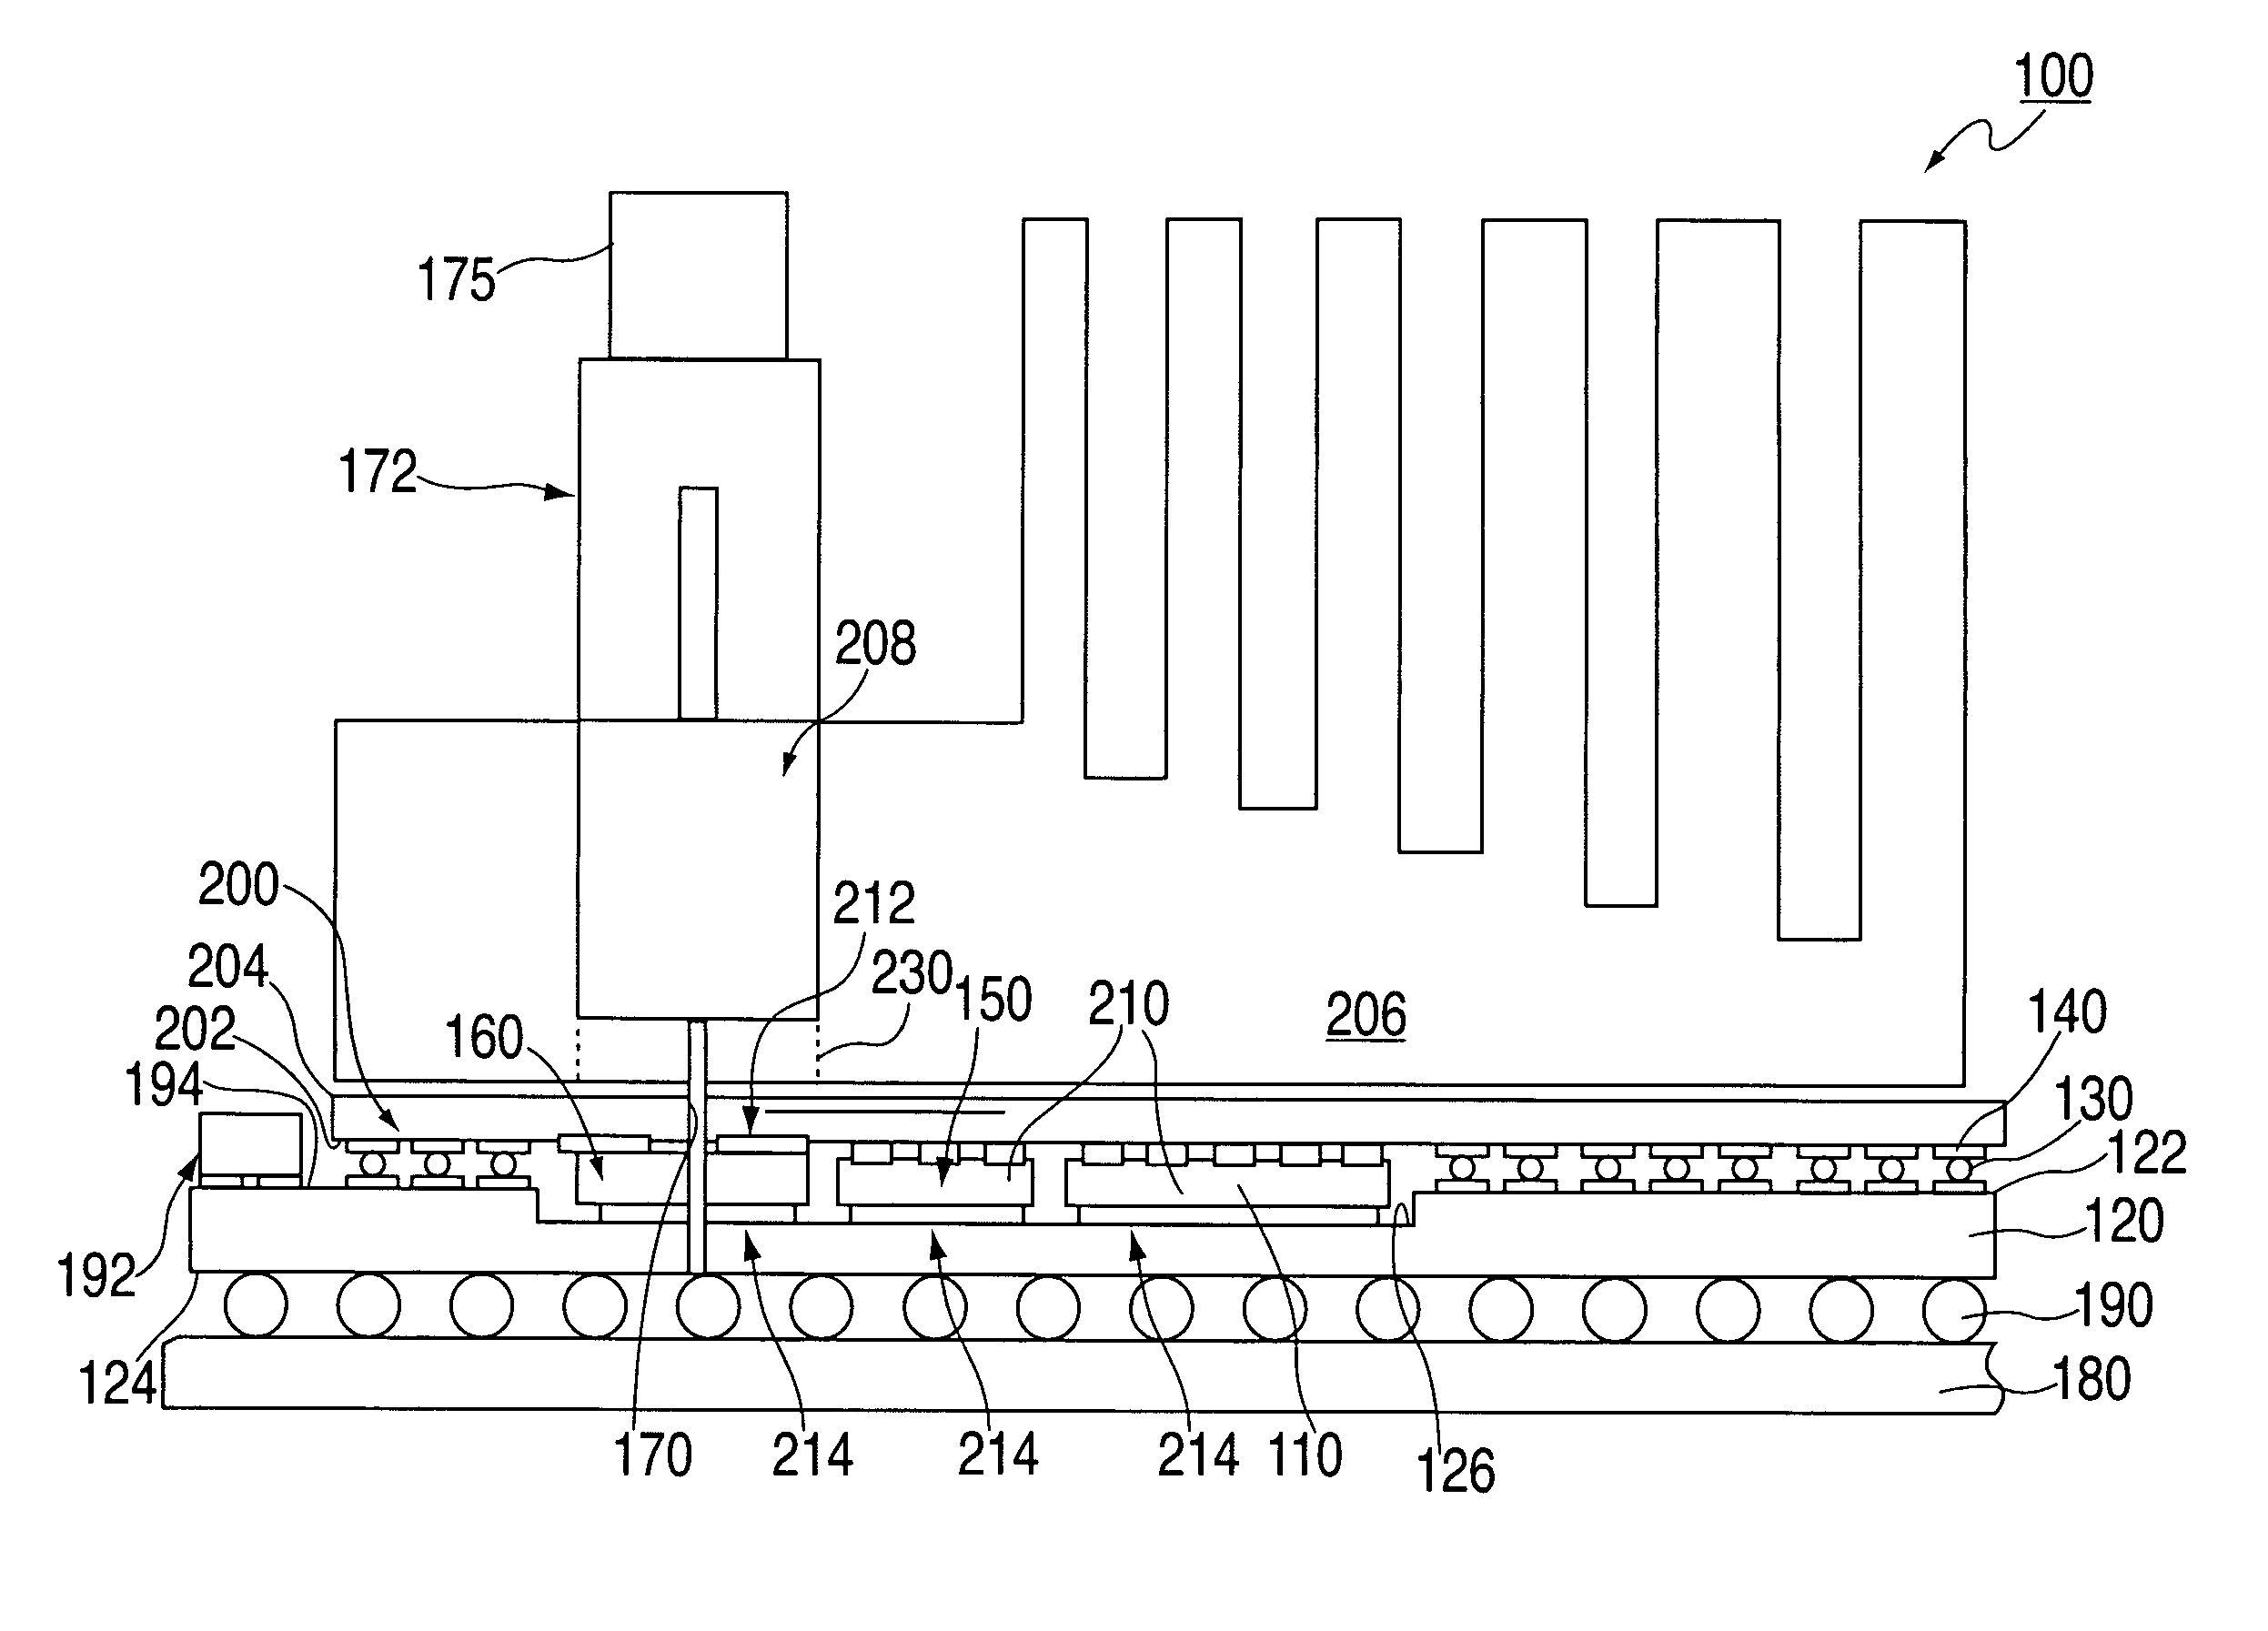 Method and apparatus for providing optoelectronic communication with an electronic device